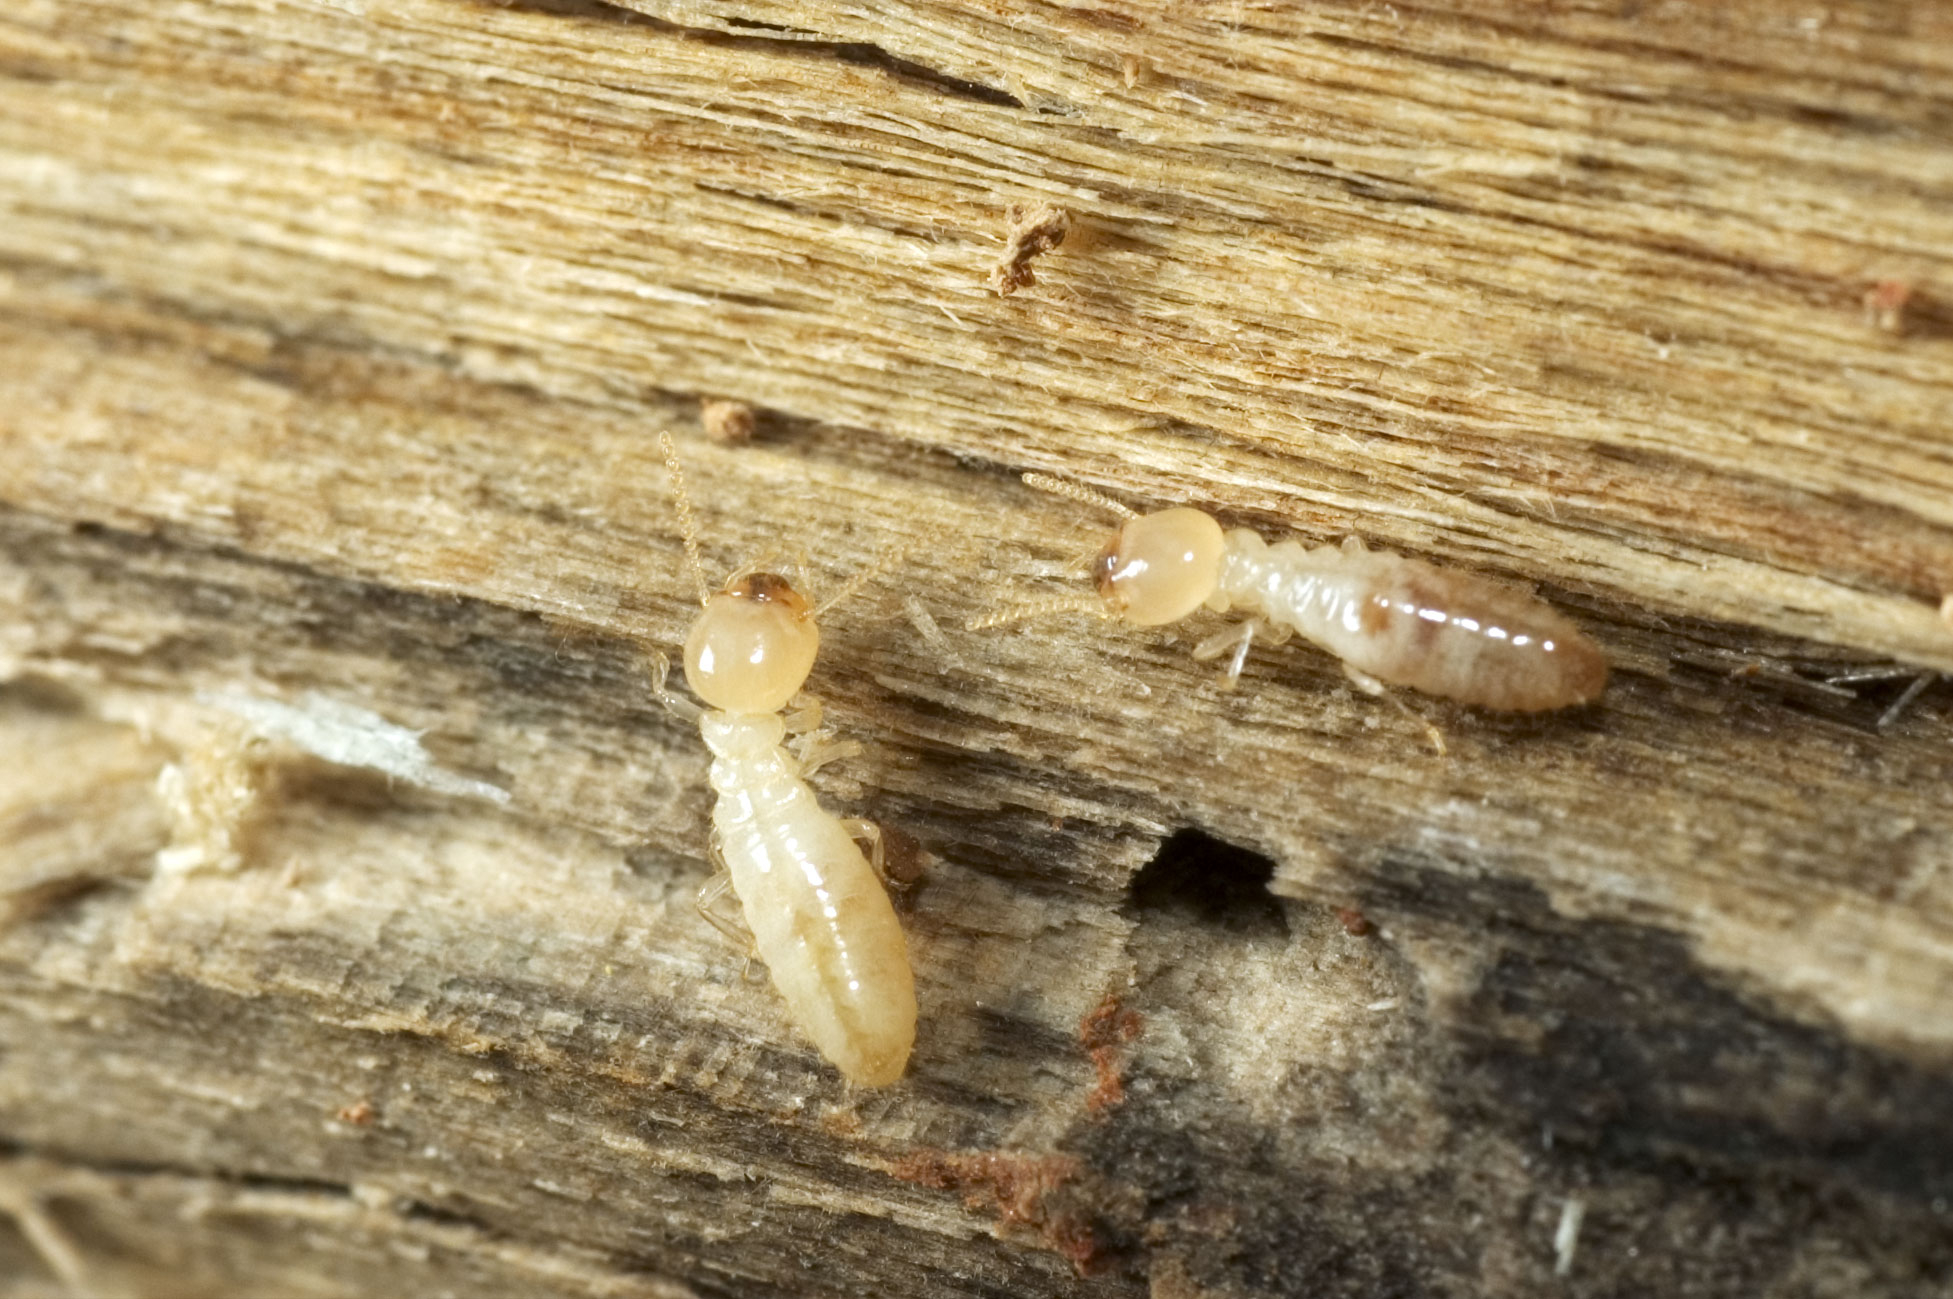 Termites: Causes & Warning Signs of an Infestation, and How to Deal